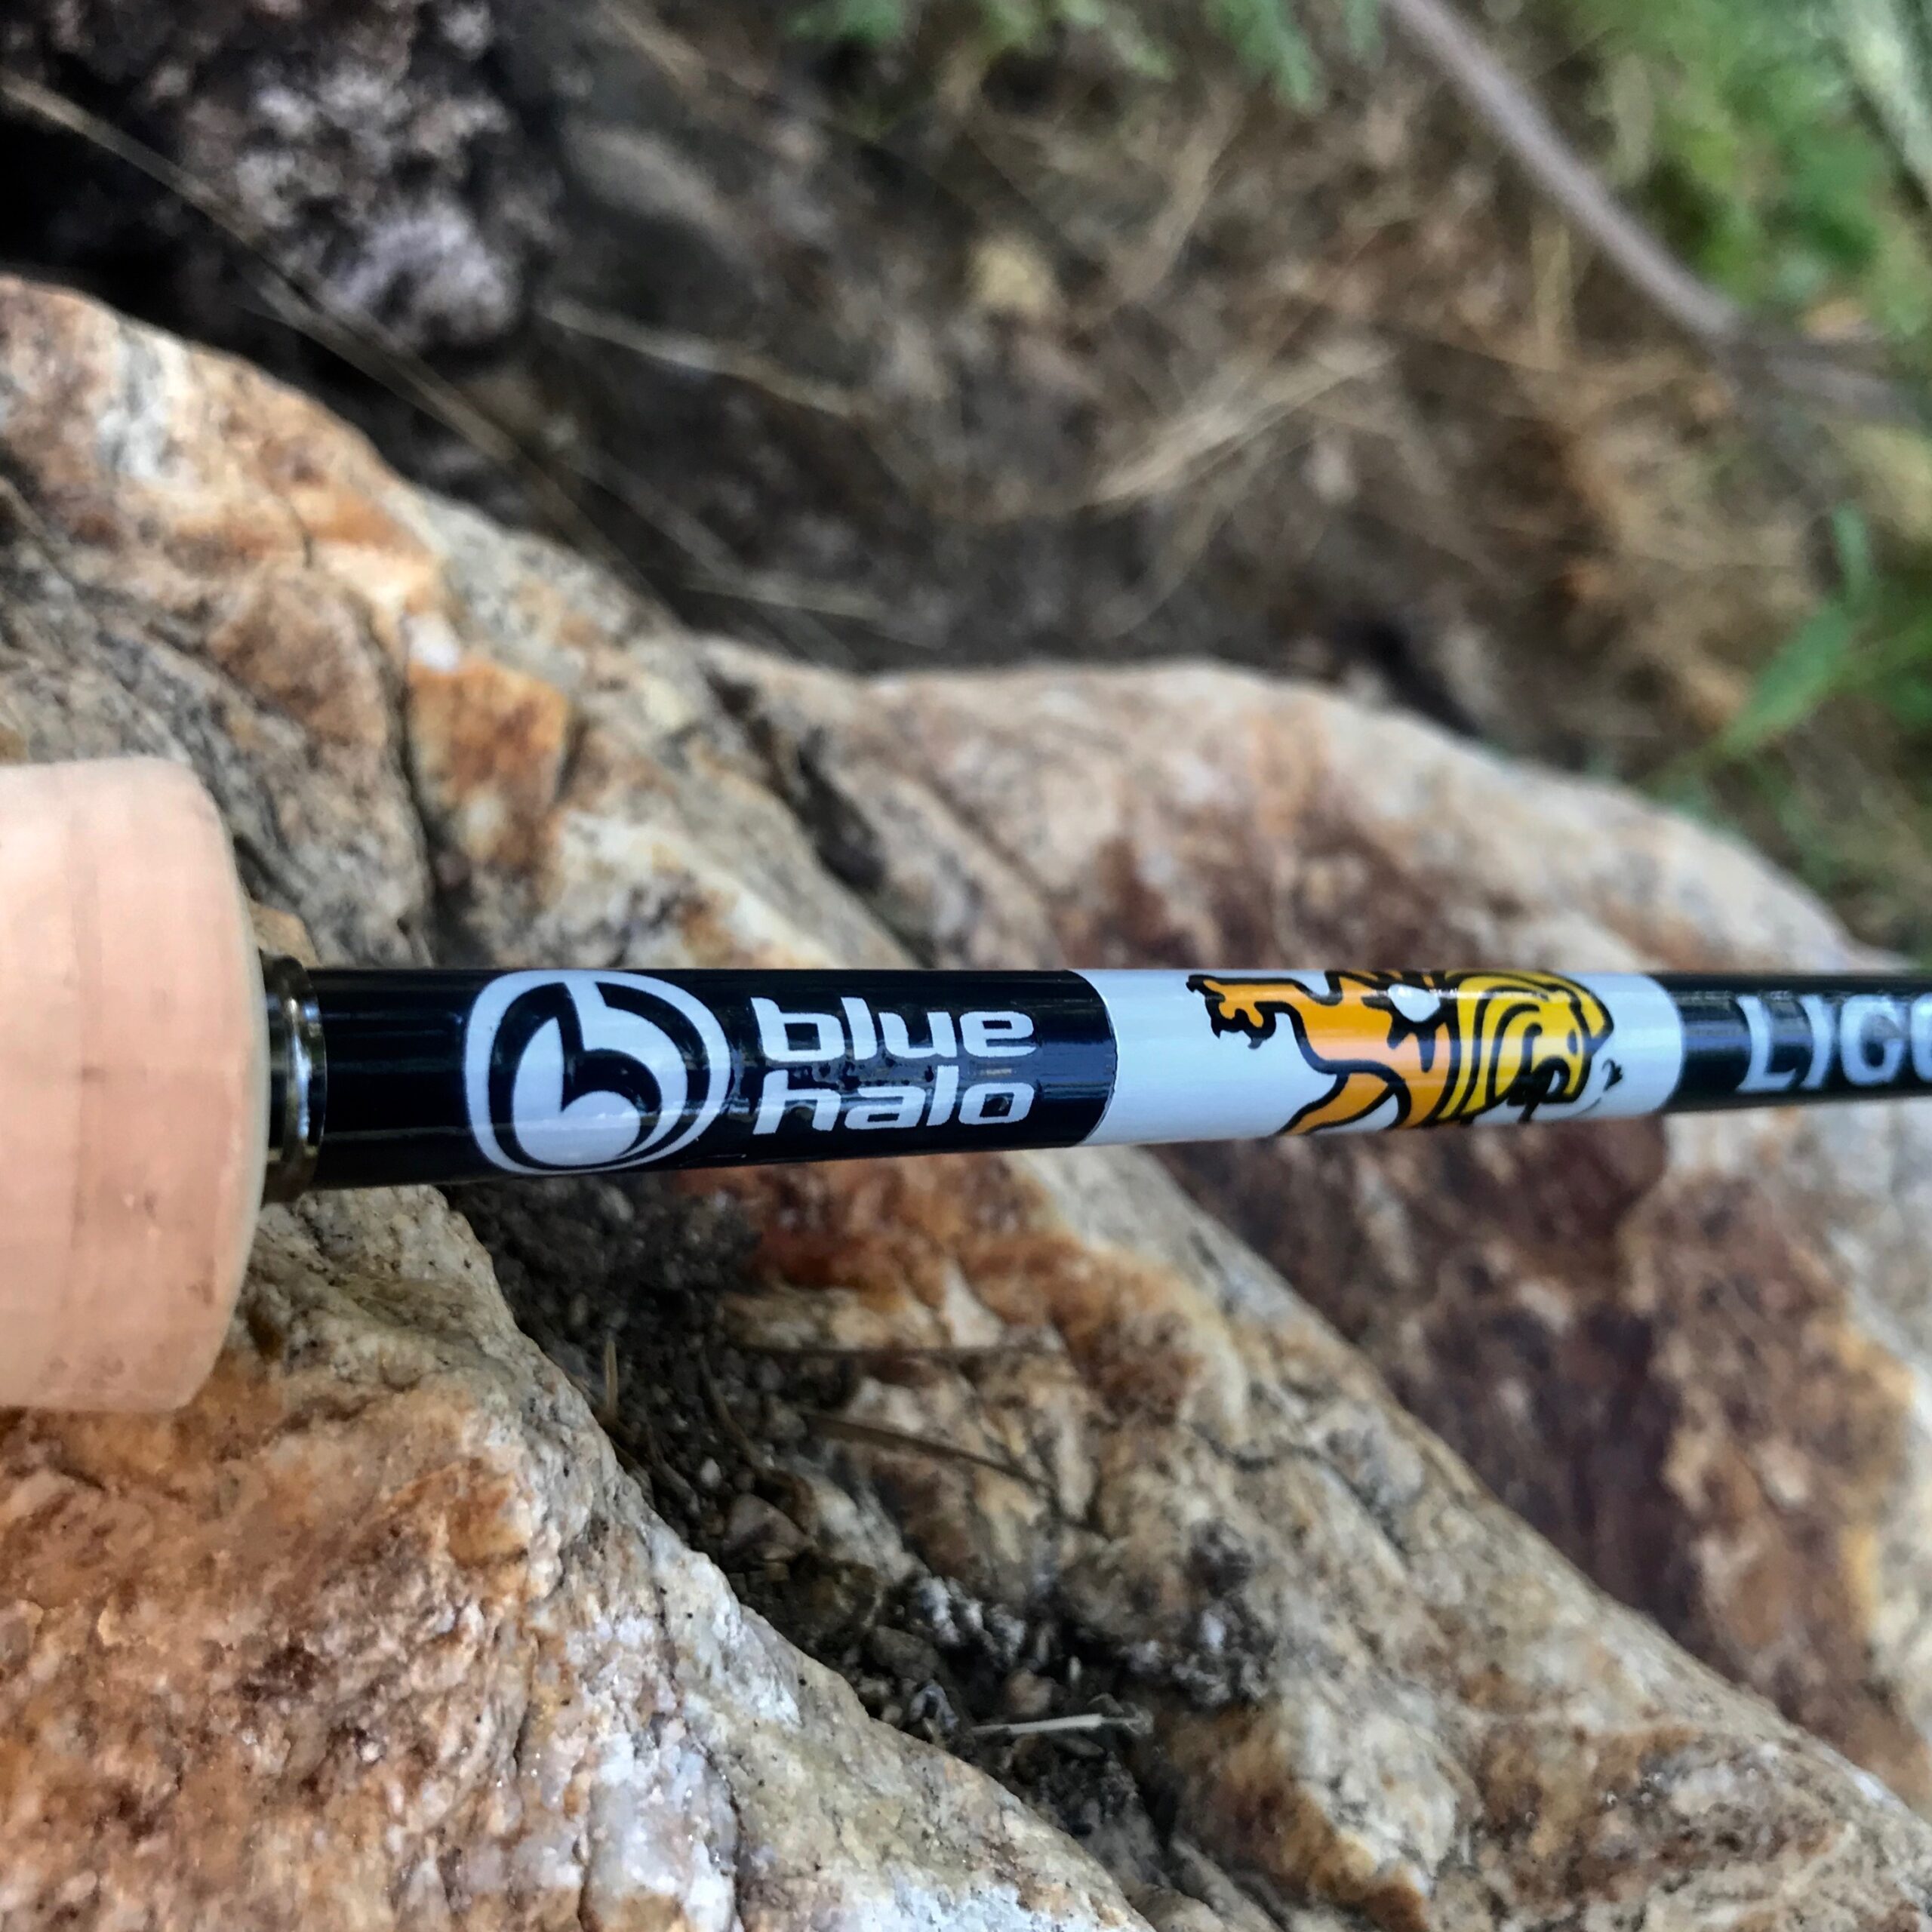 Custom Built Fly Rods featuring Sage, EPIC, Blue Halo and more